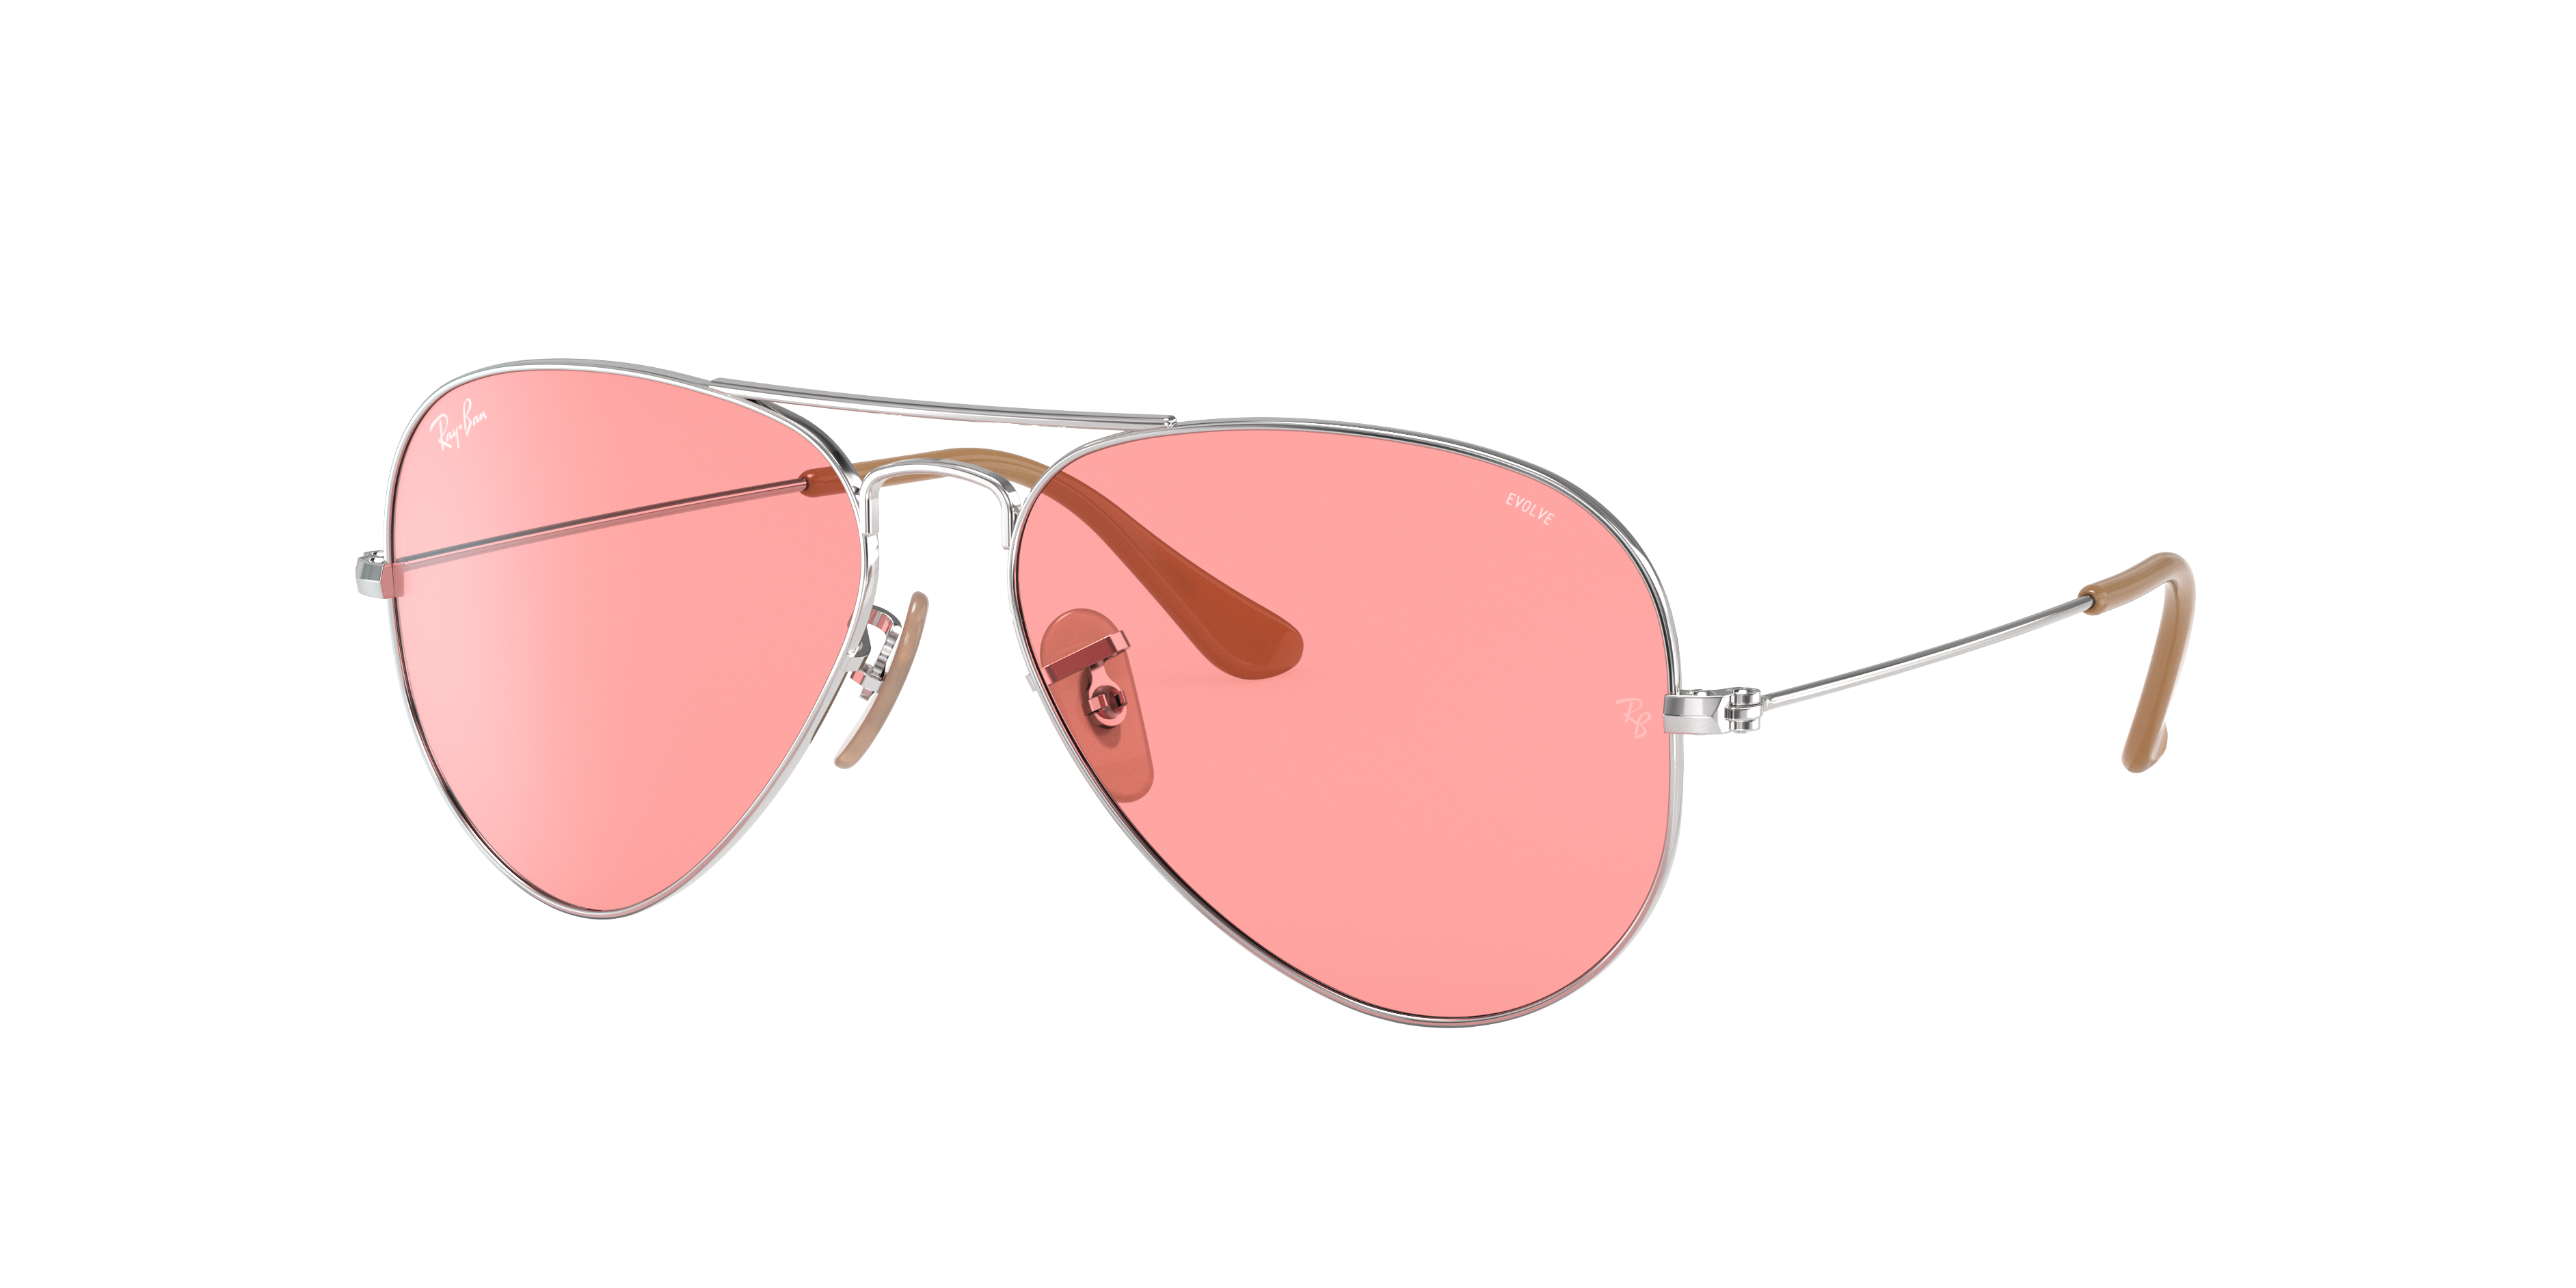 Ray-Ban Aviator Washed Evolve RB3025 